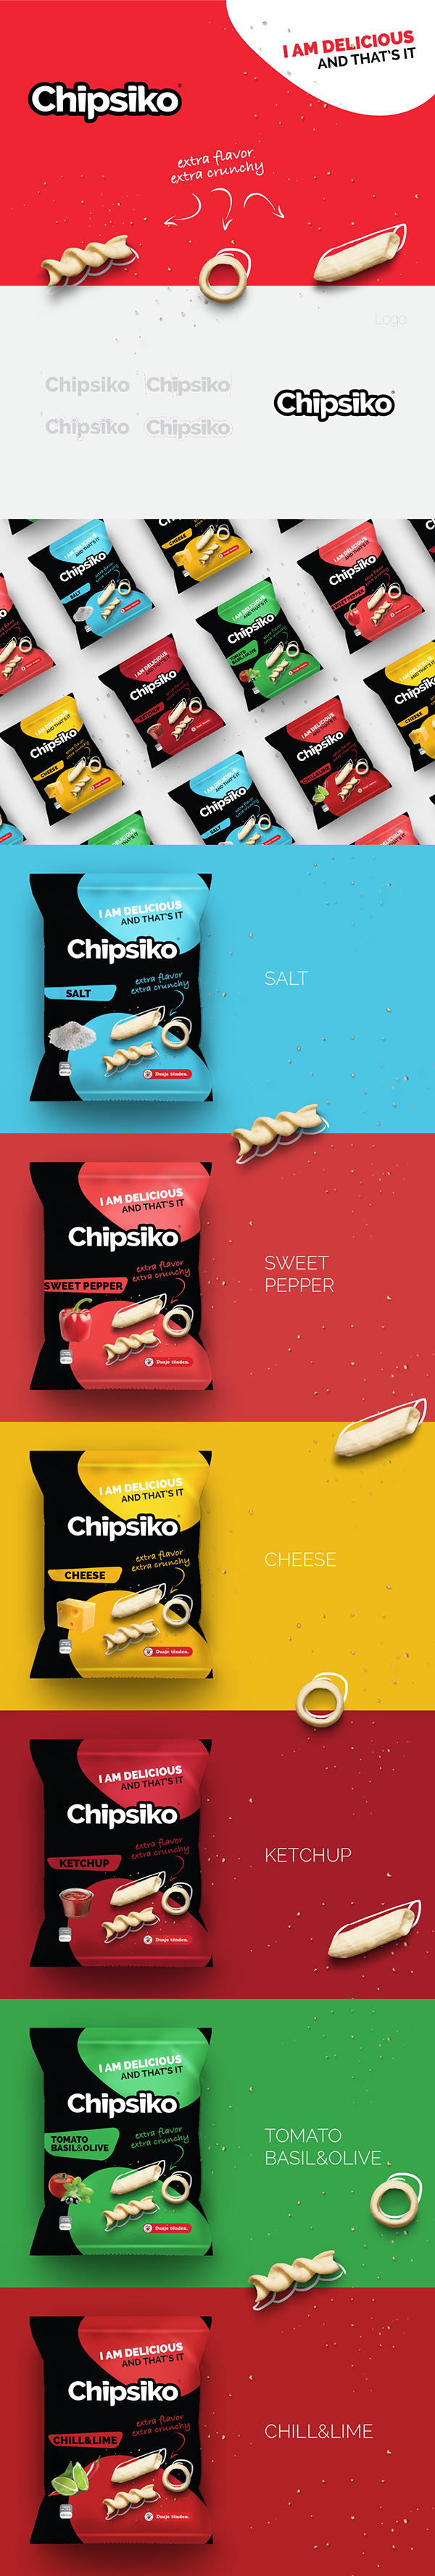 Chipsiko - Packaging